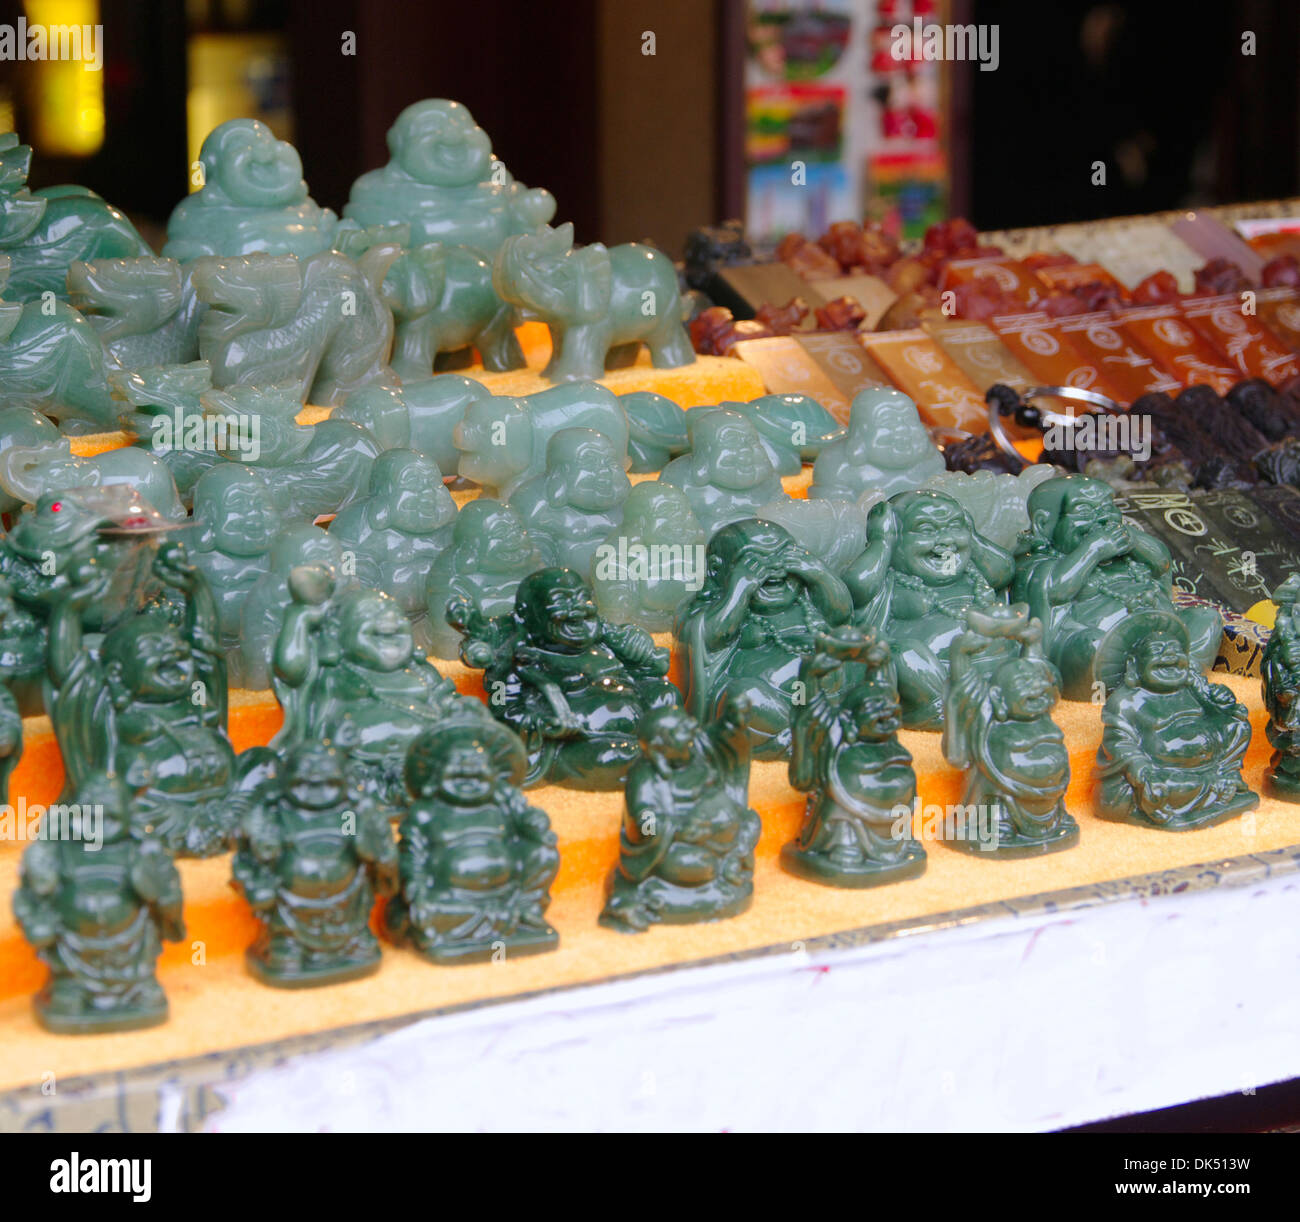 jade figurines Buddhas put up for sale (see no, hear no, I will not tell) Shanghai China 14.11.2013 Stock Photo